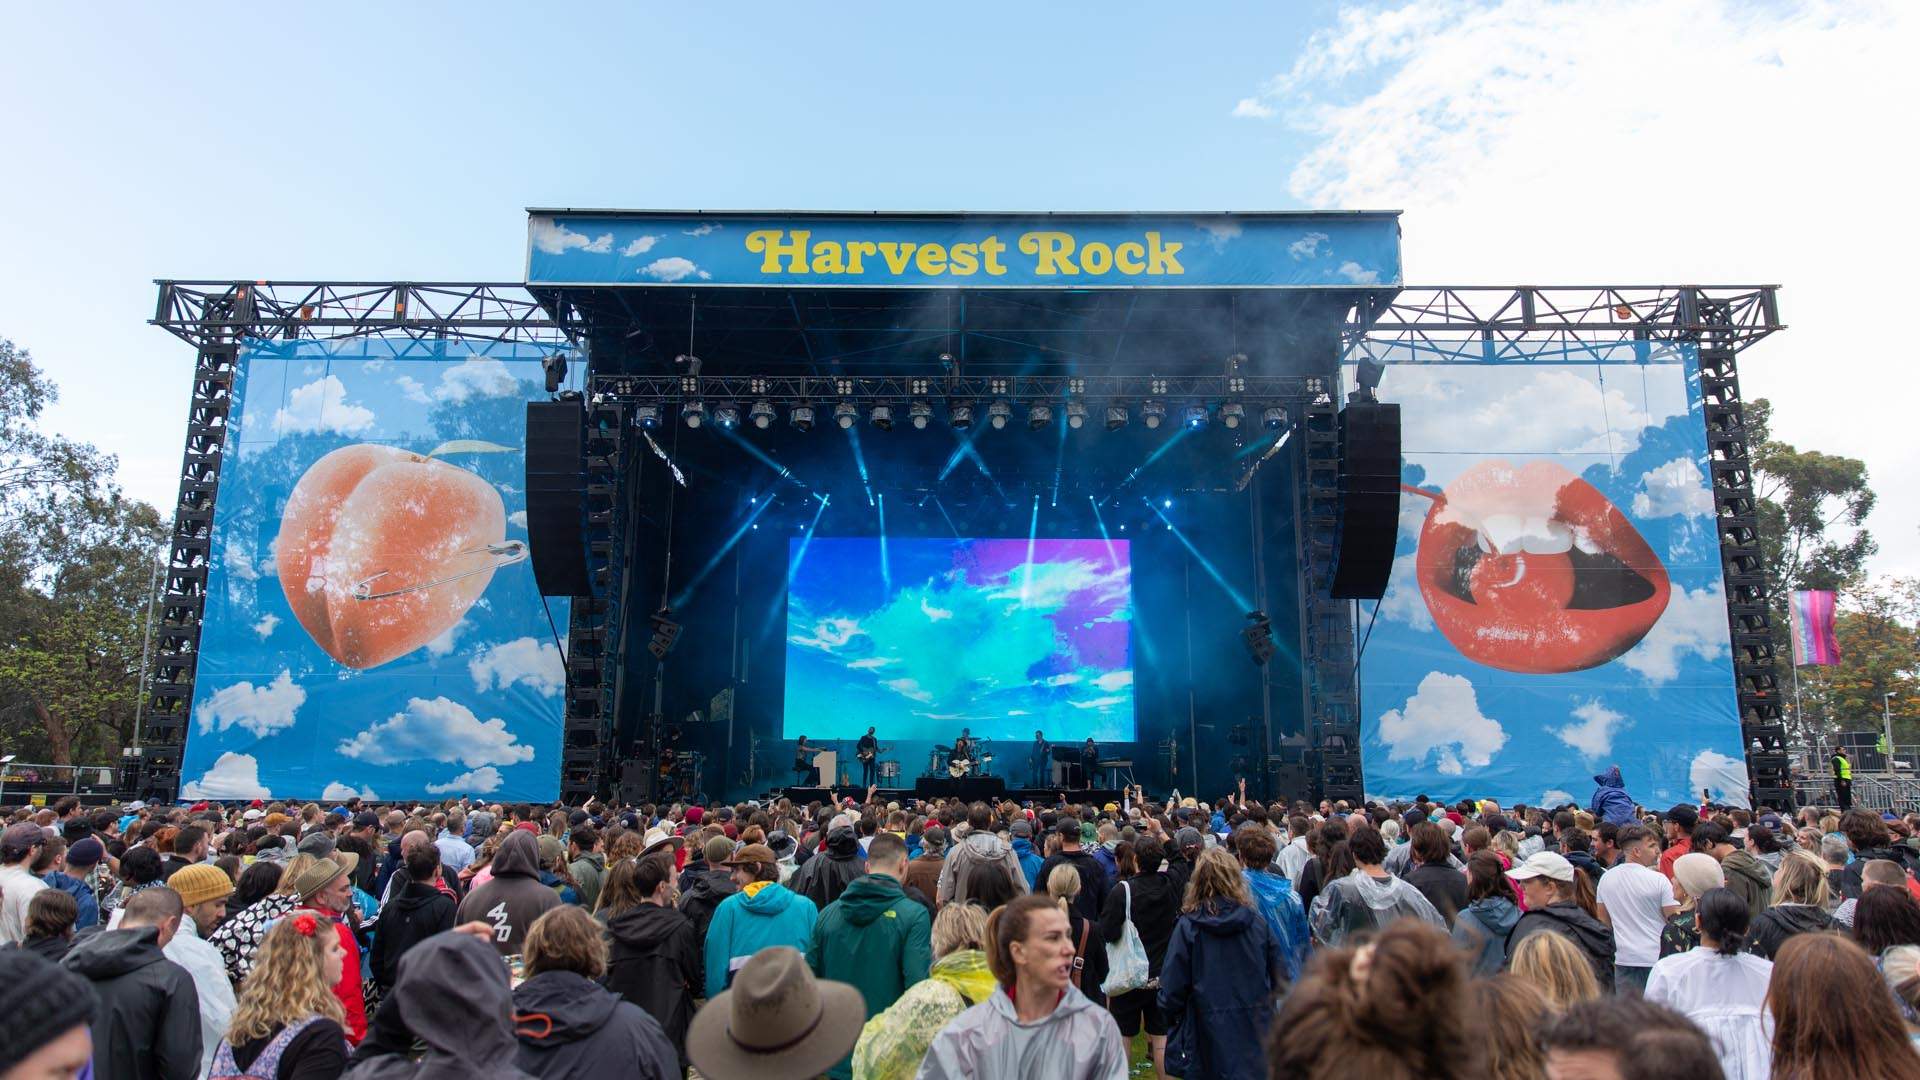 Adelaide's Harvest Rock Will Return for 2023 This Spring with Two Days of Music, Food and Wine